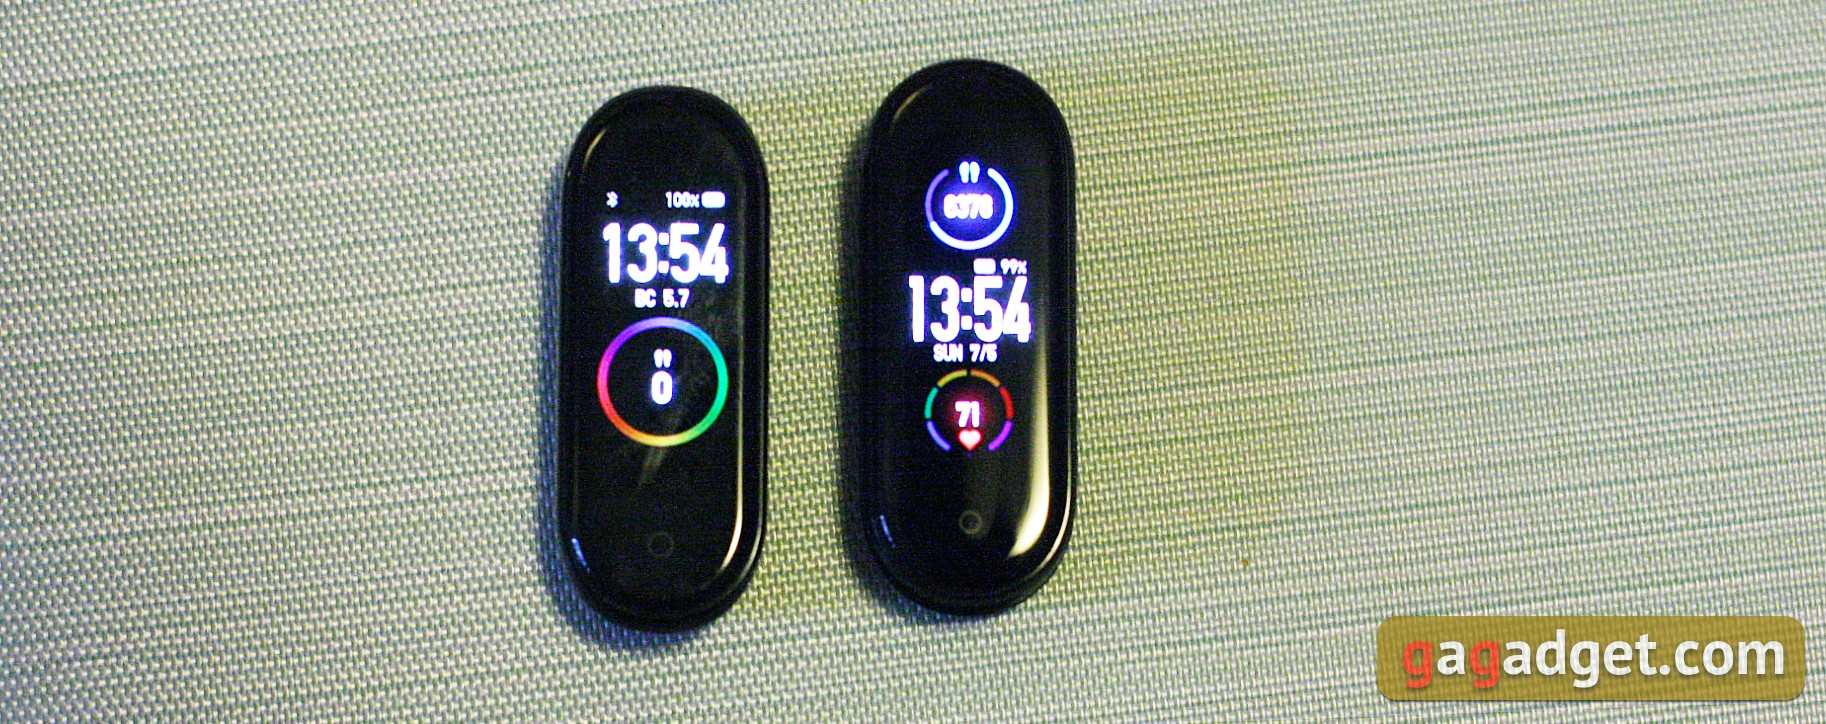 Mi Band 5 vs Mi Band 4: What's the Difference